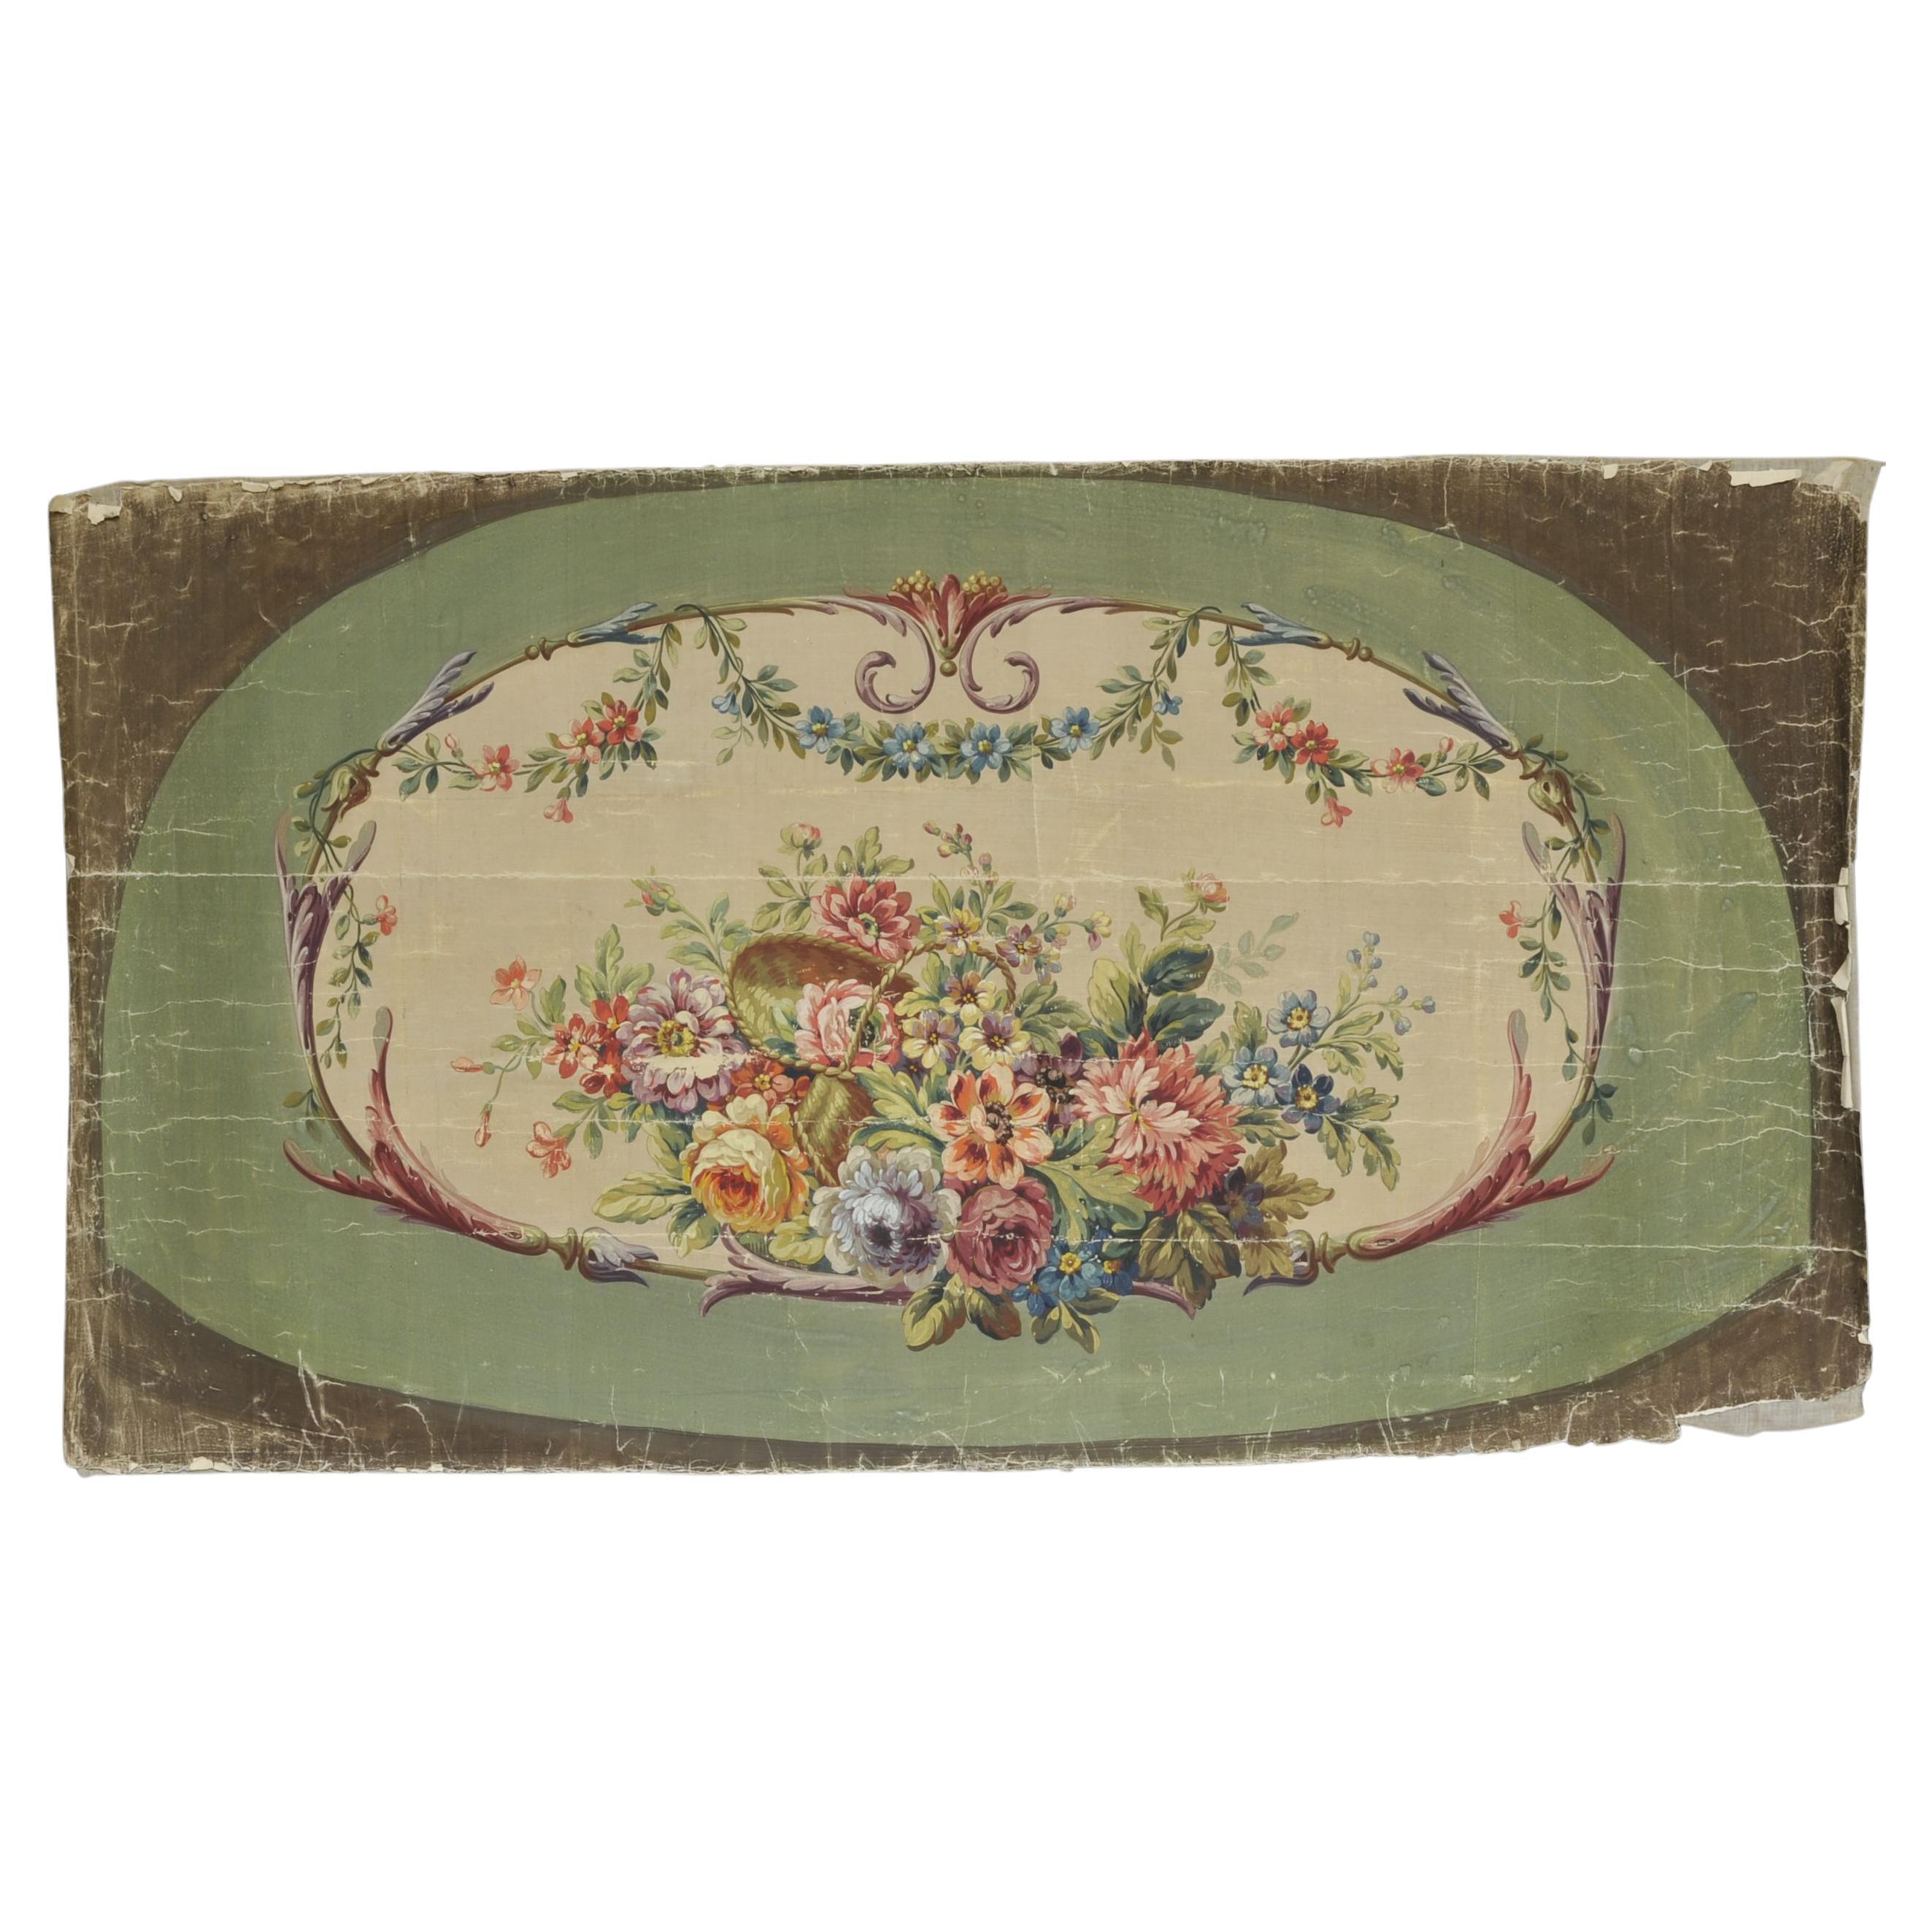 19th Century Aubusson Cardboard with Flower Basket Decor For Sale